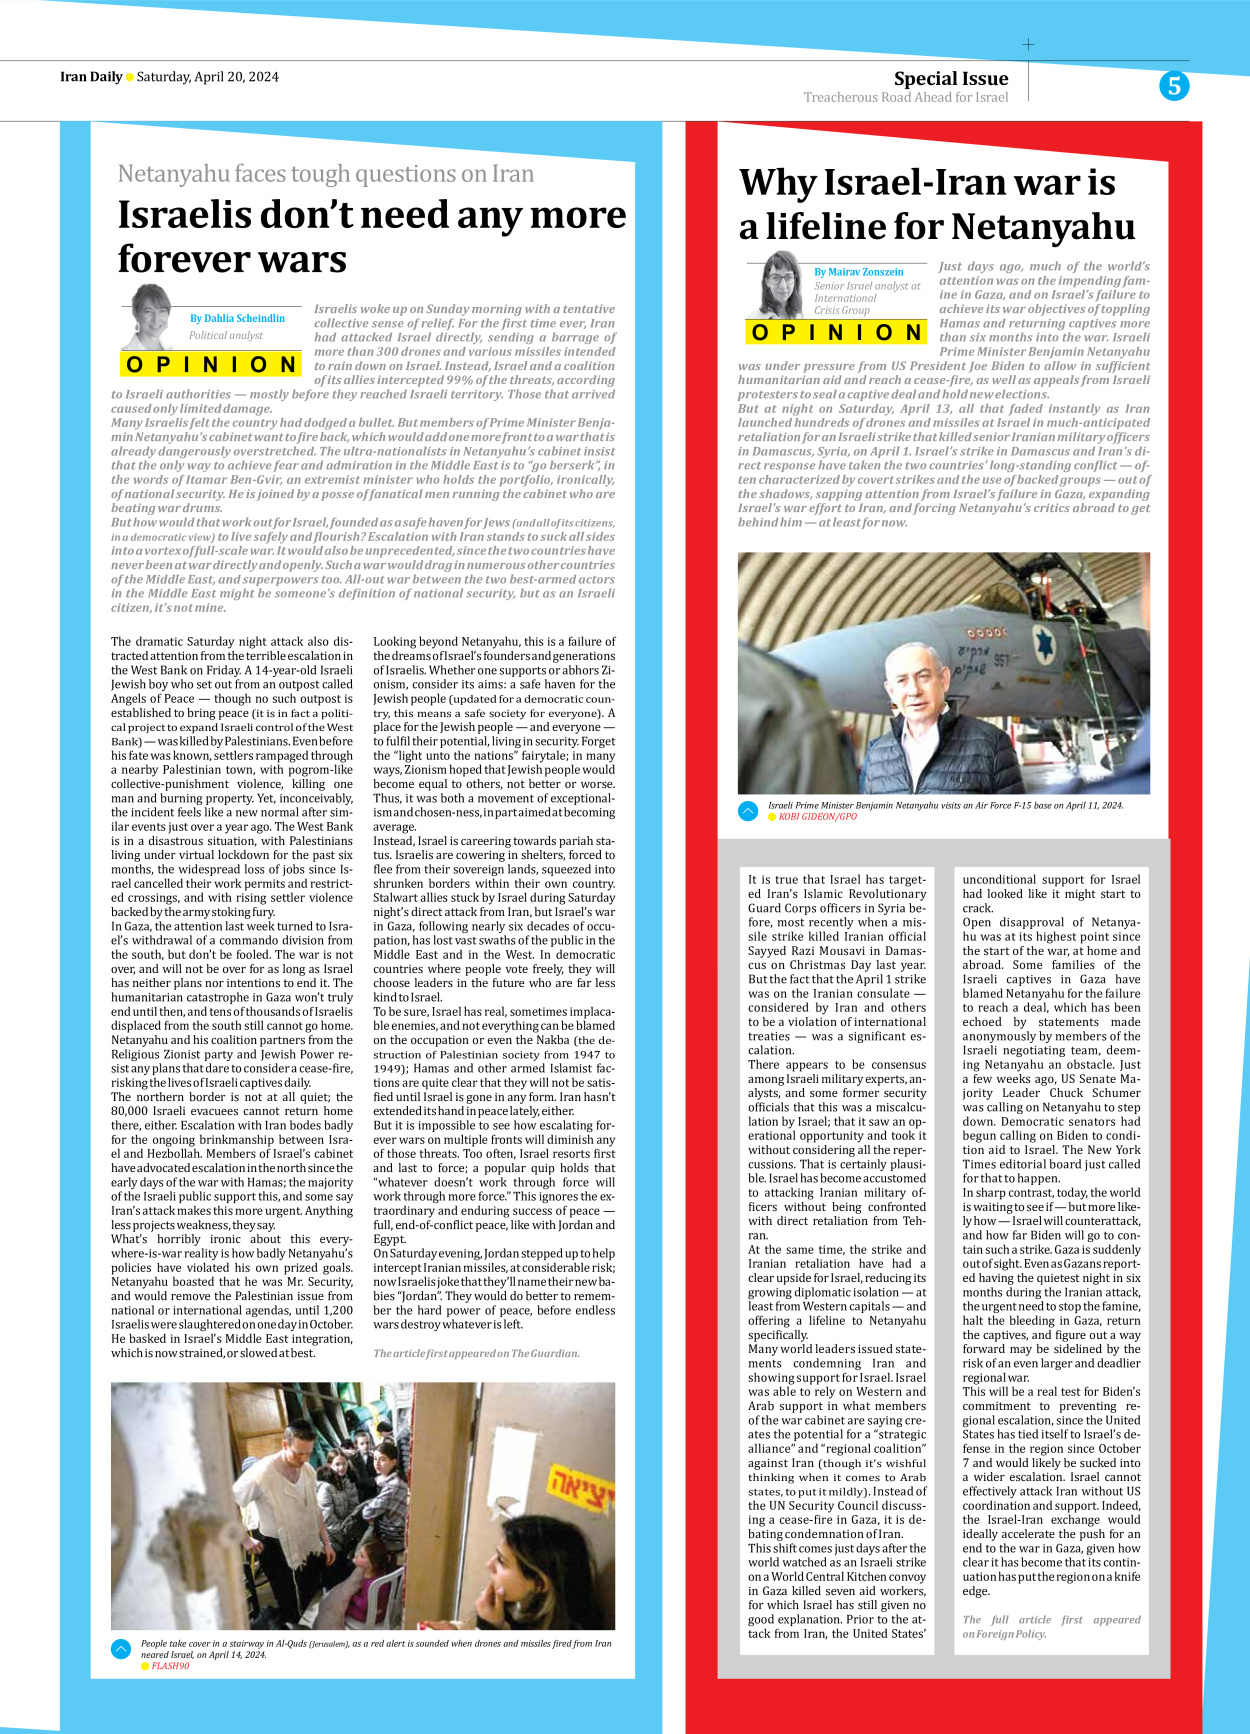 Iran Daily - Number Seven Thousand Five Hundred and Thirty Seven - 20 April 2024 - Page 5